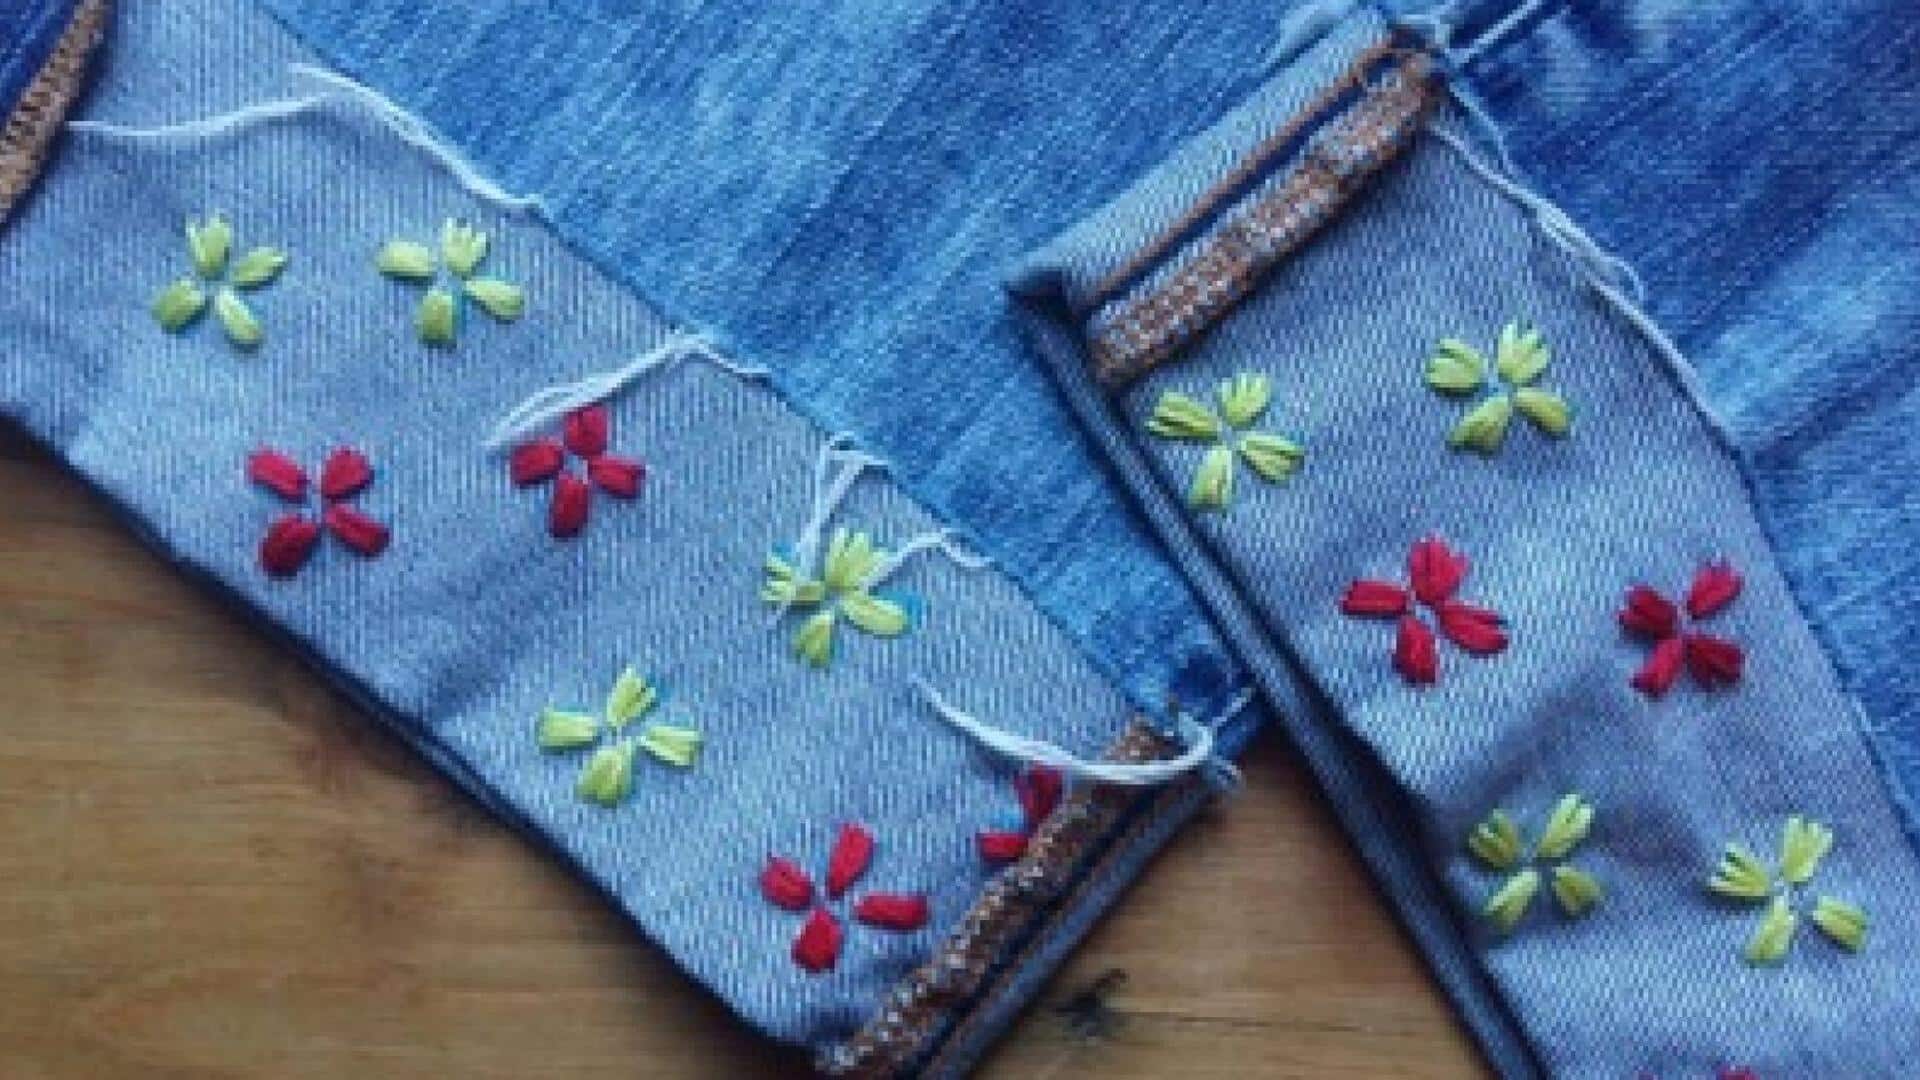 Transform your denim jeans with embroidery